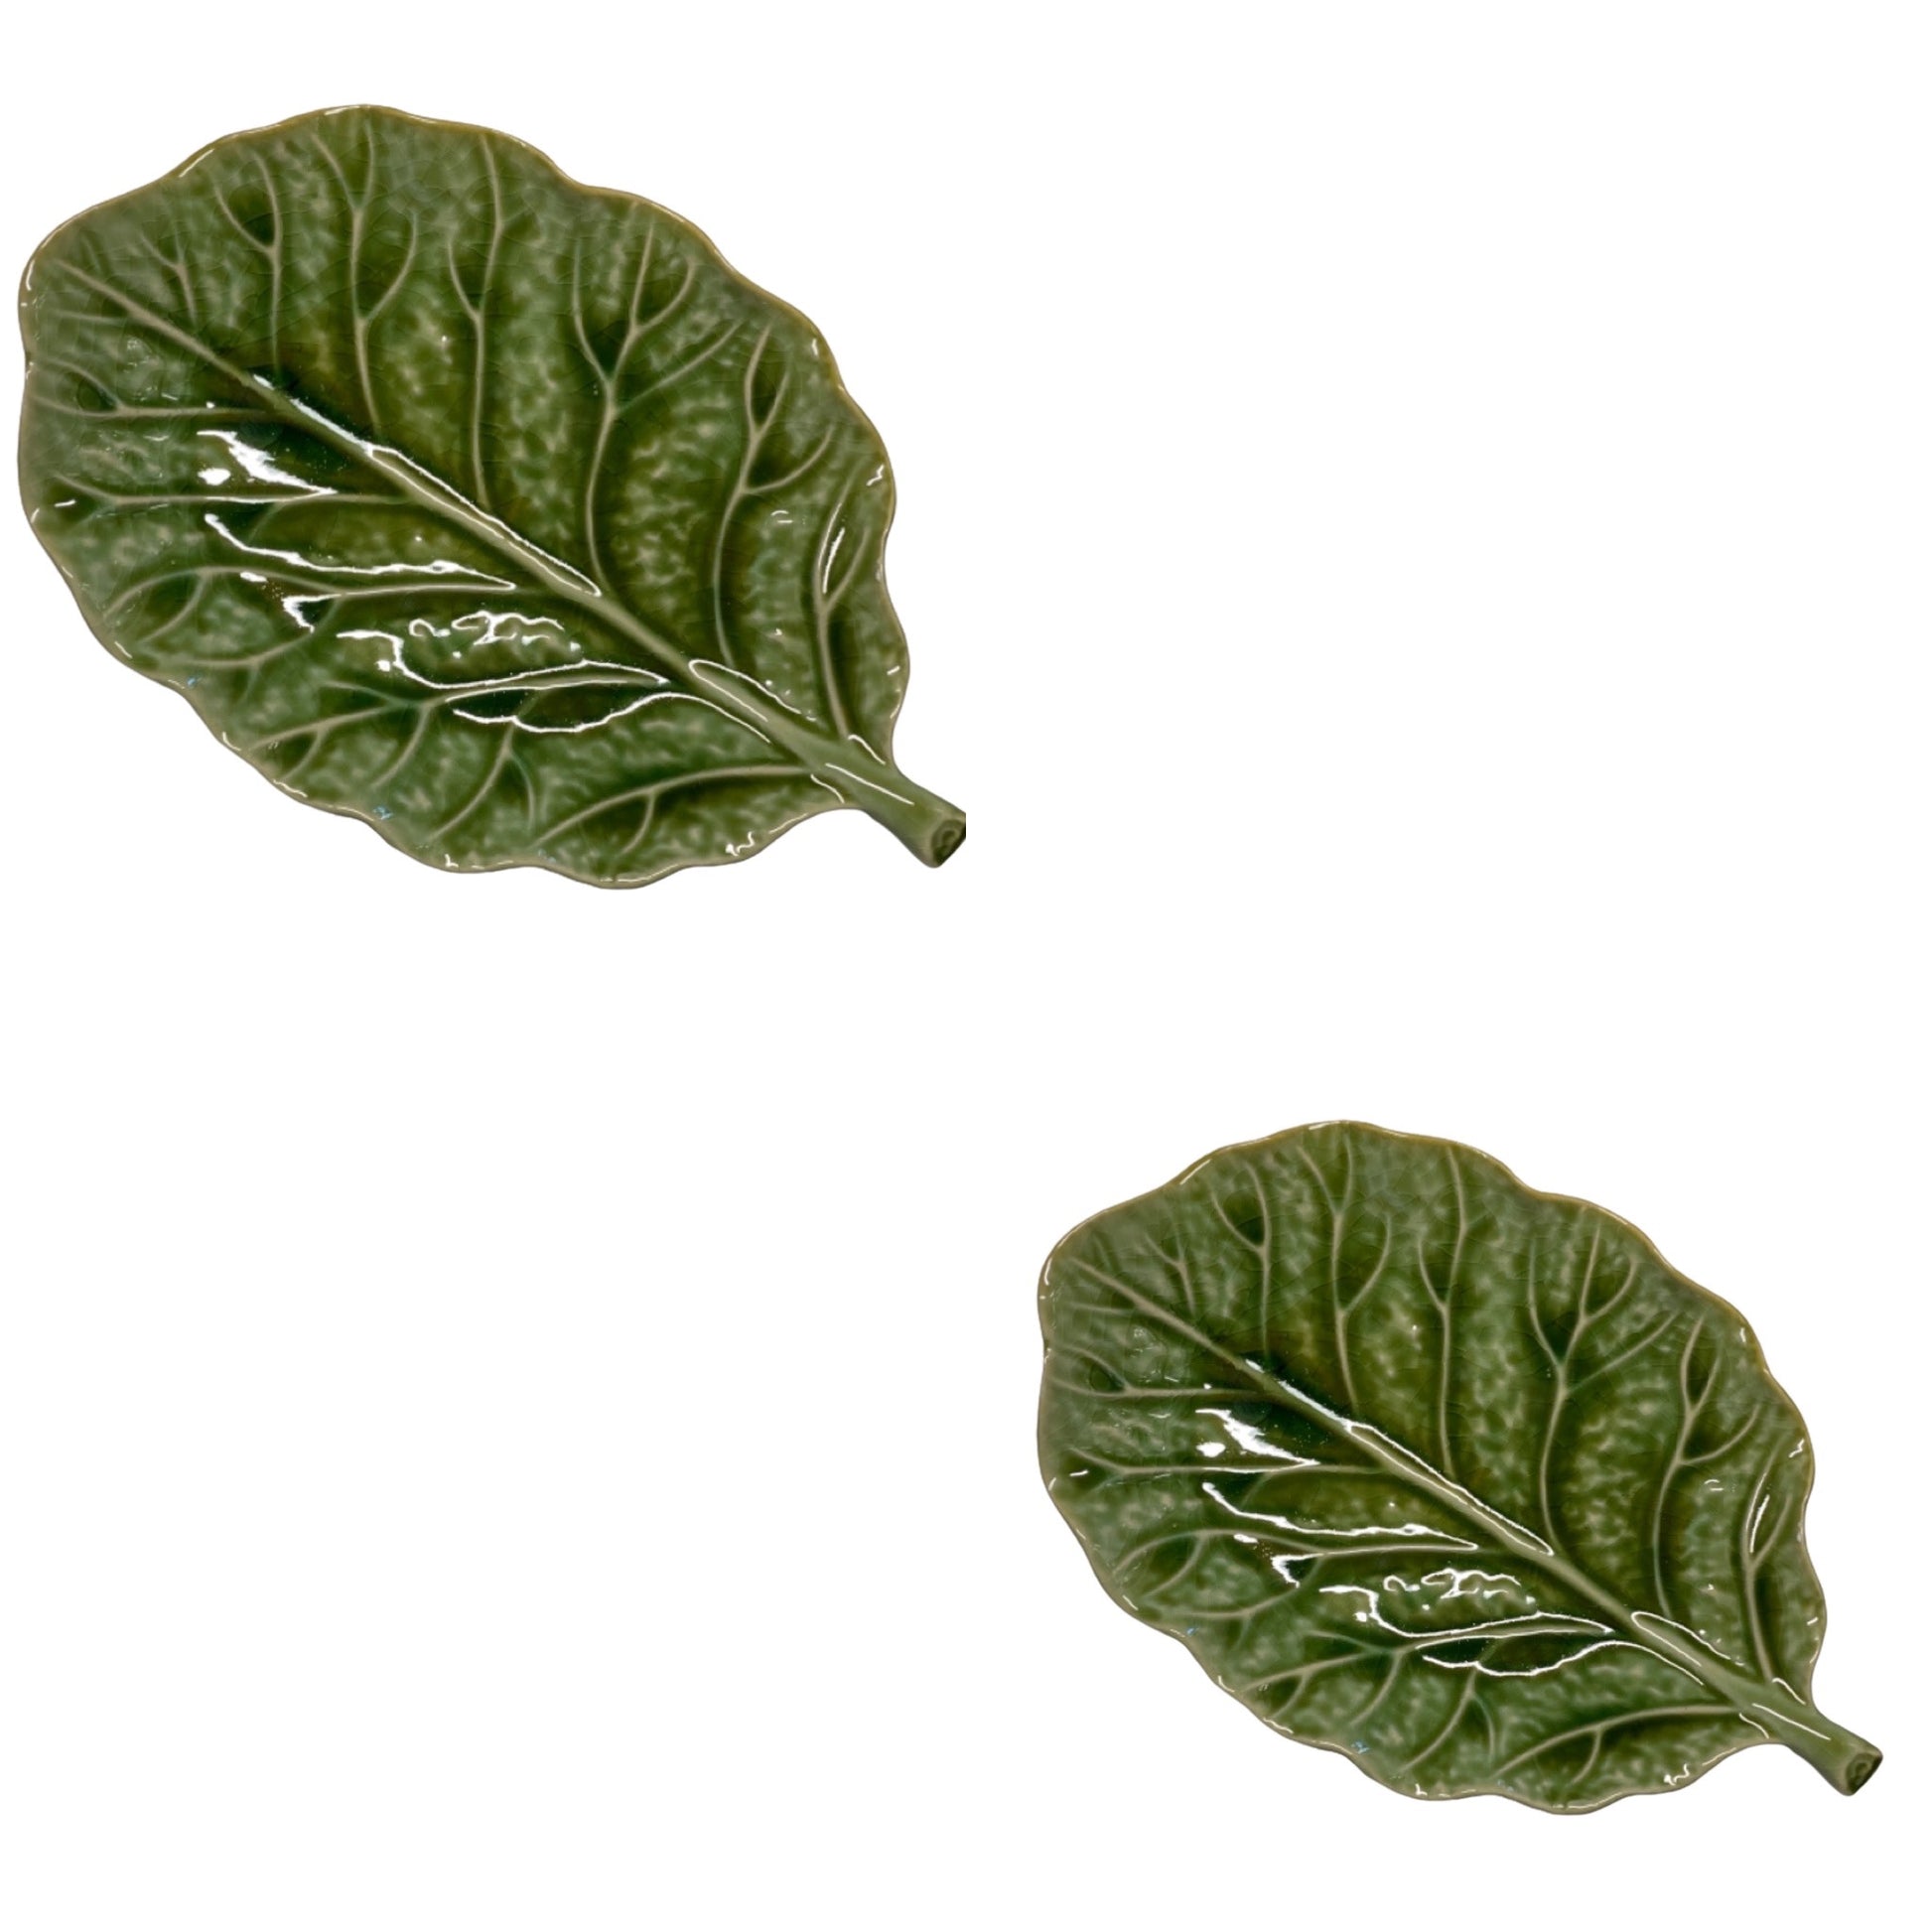 Leaf Green Ceramic Plate Set of 2 - The Renmy Store Homewares & Gifts 